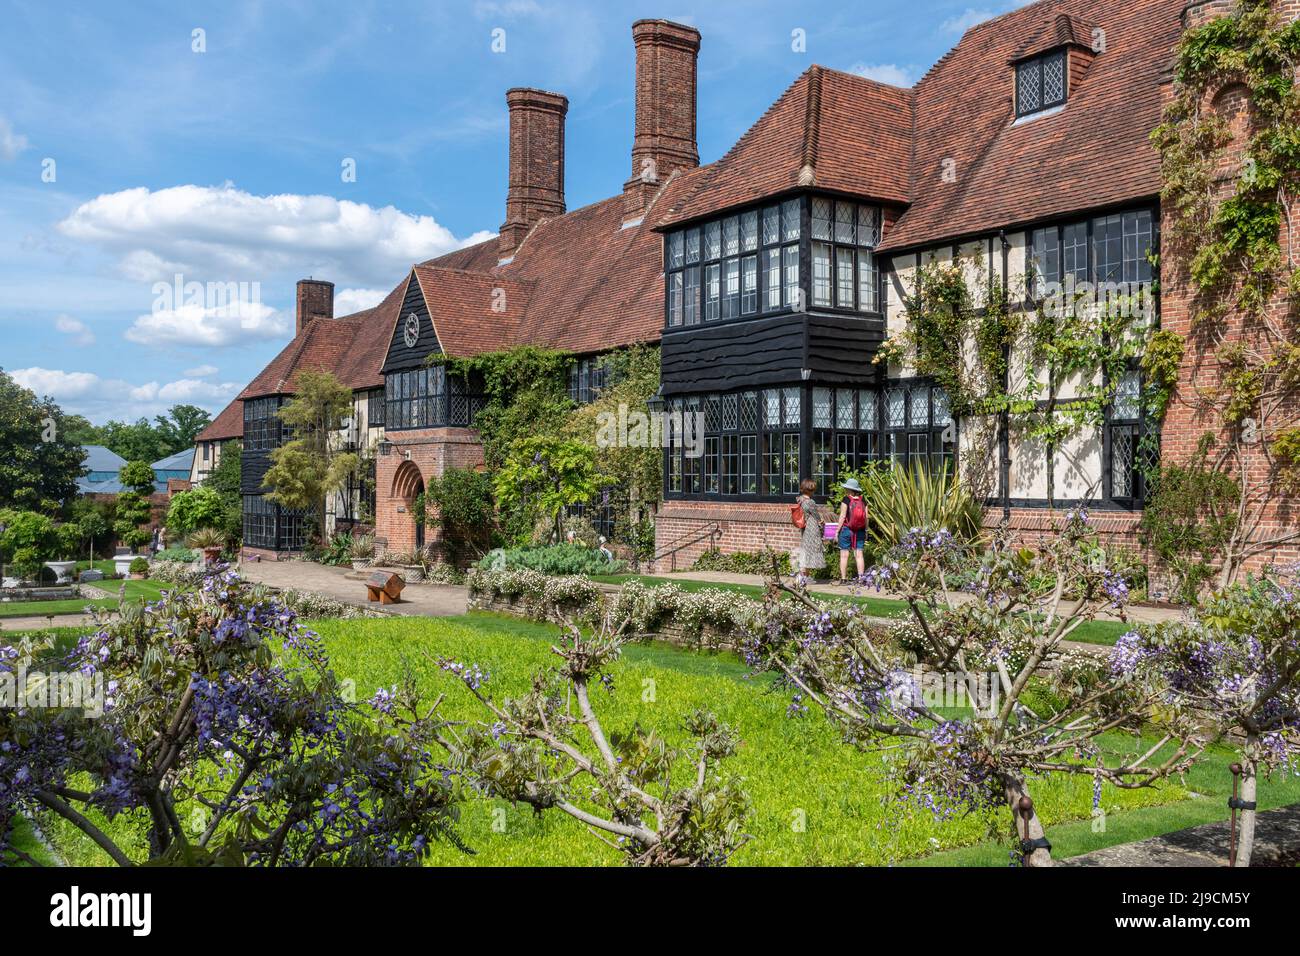 RHS Wisley Garden, the old Laboratory building with plants, including flowering wisteria, during May, Surrey, England, UK Stock Photo